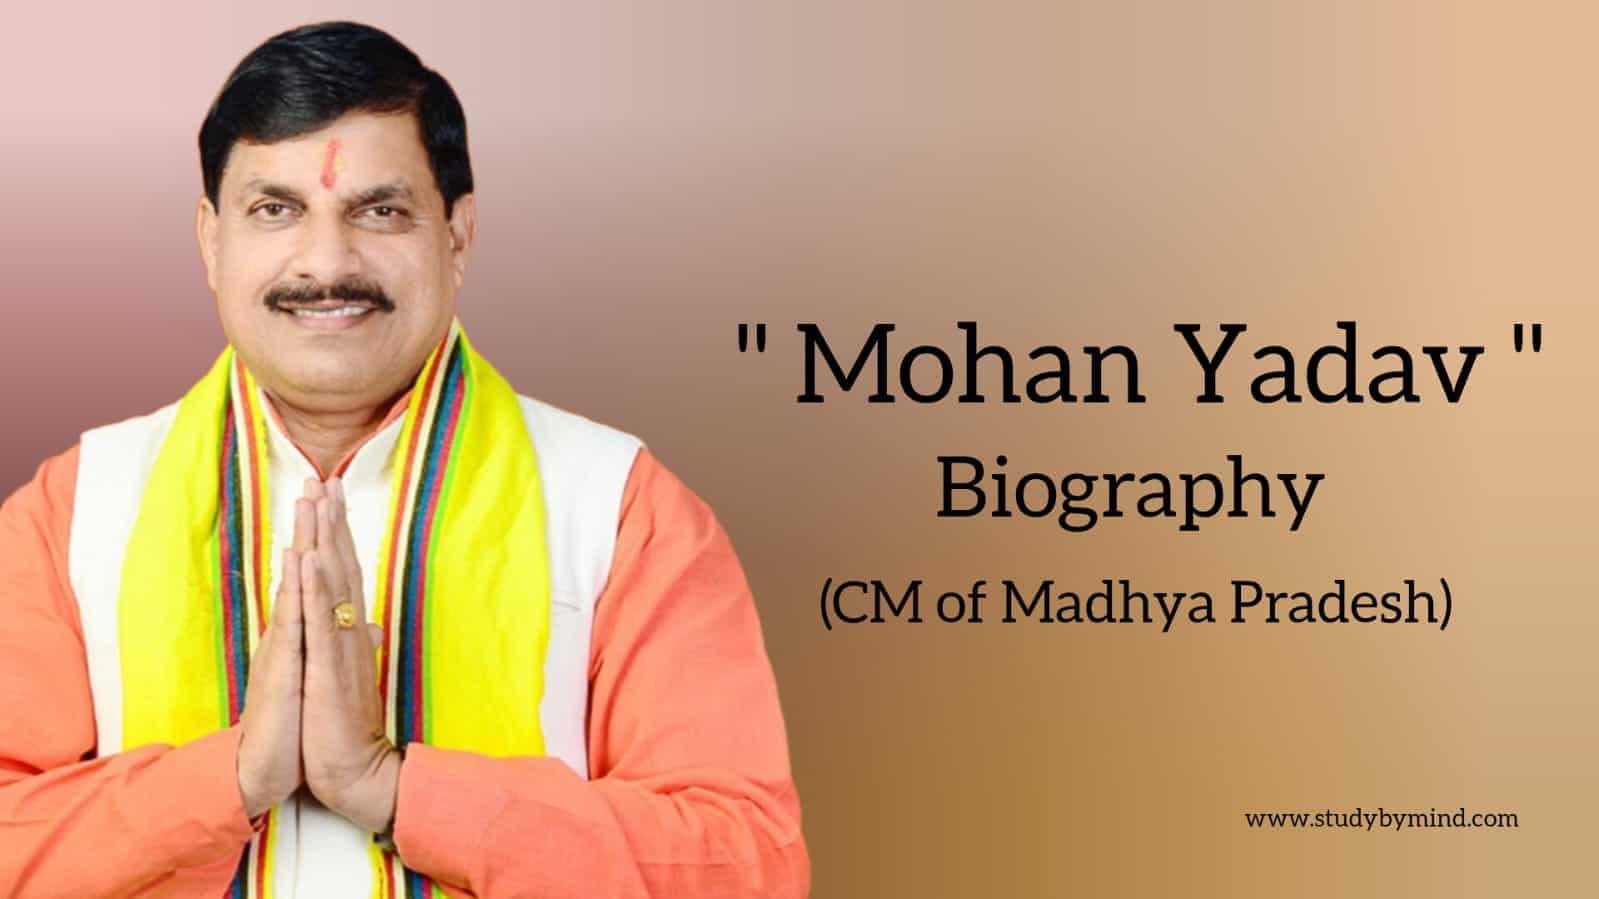 You are currently viewing Mohan yadav biography in english (Chief Minister of Madhya Pradesh)